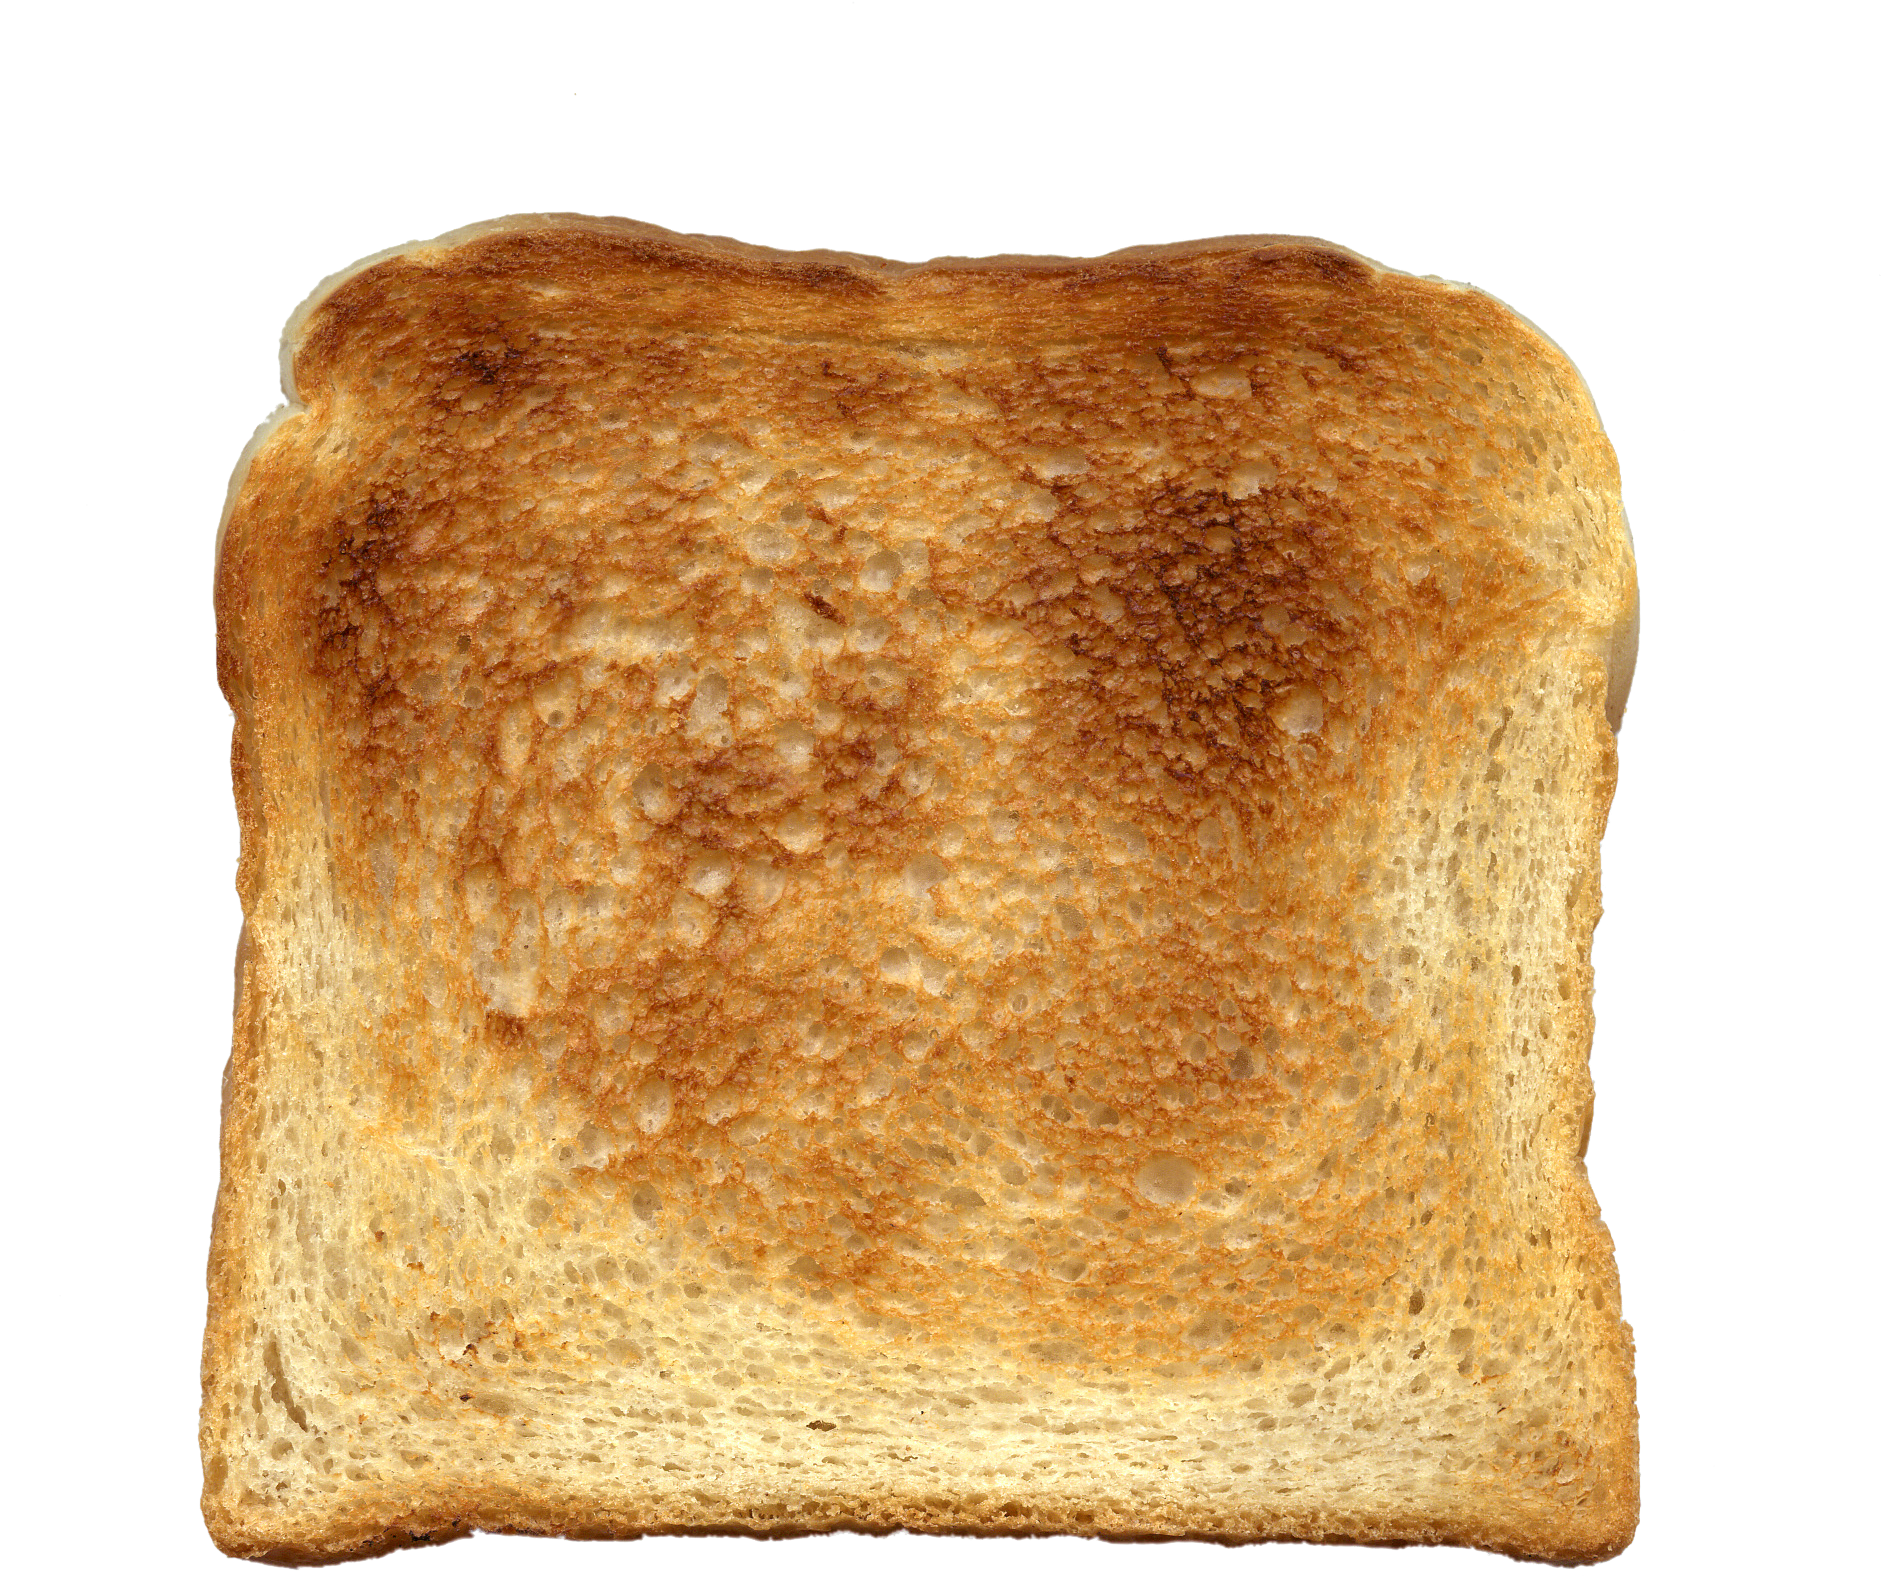 A Piece Of Toasted Bread